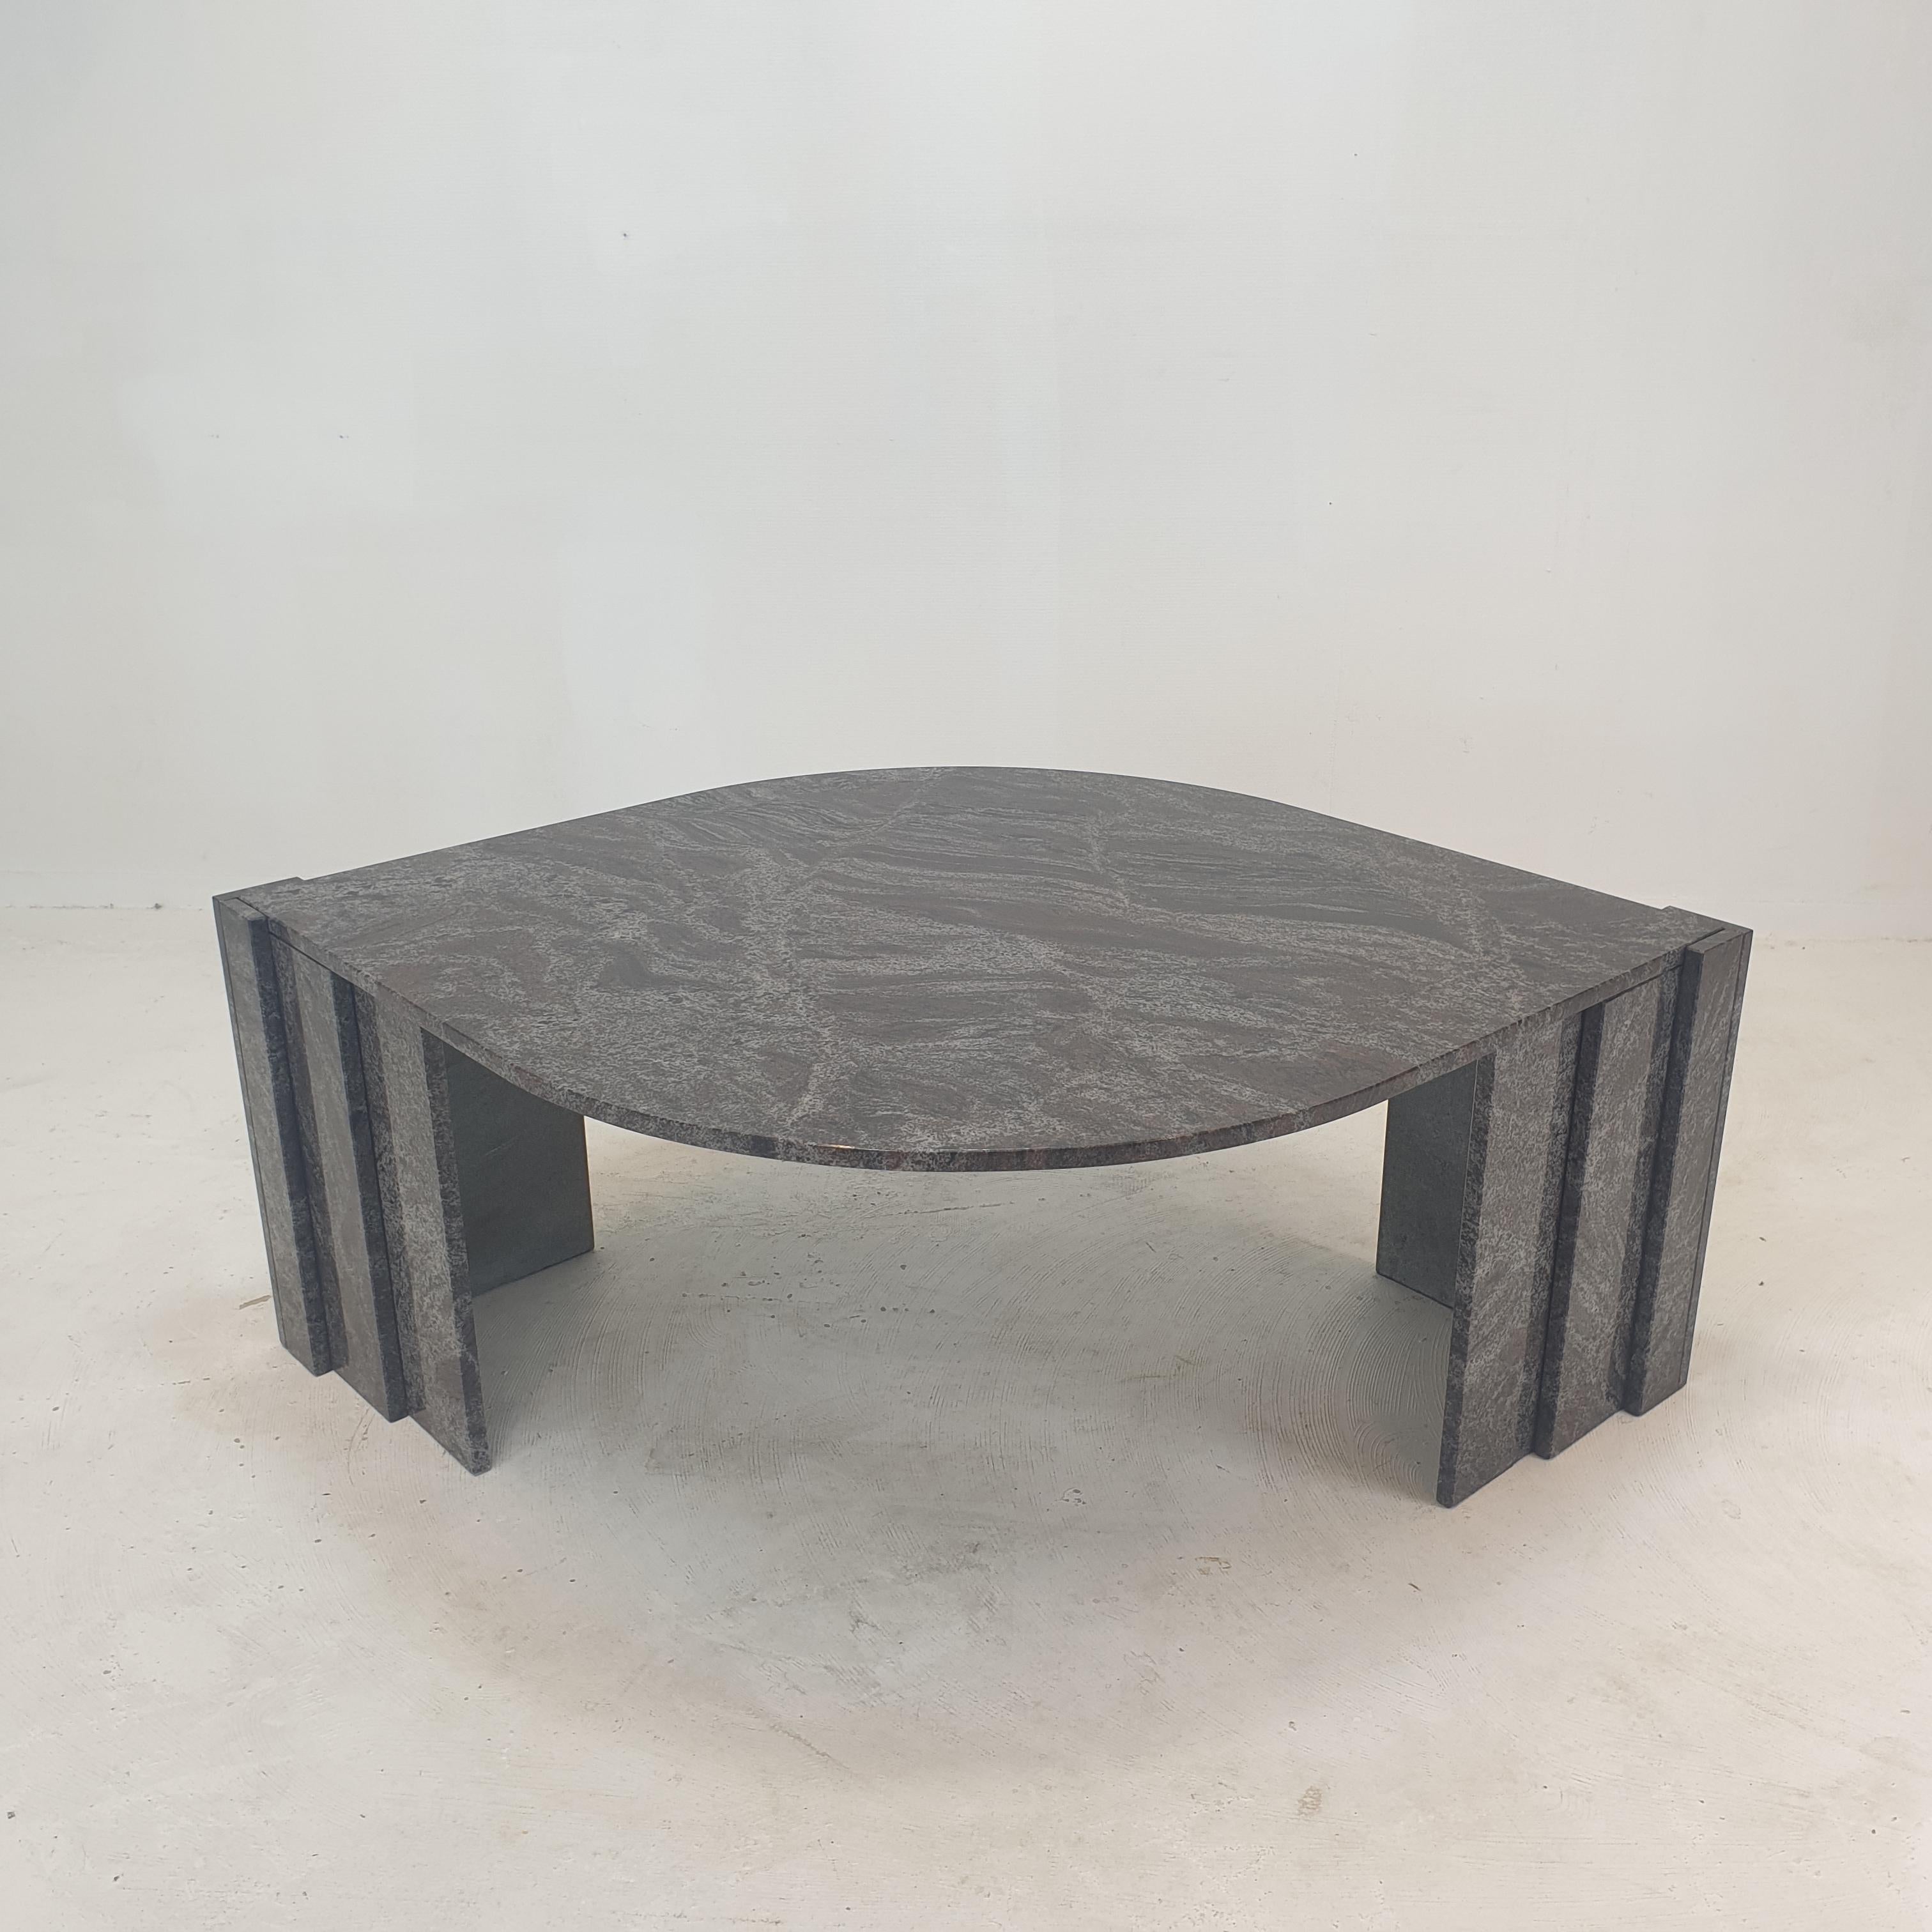 Hand-Crafted Italian Granite Coffee Table, 1980's For Sale